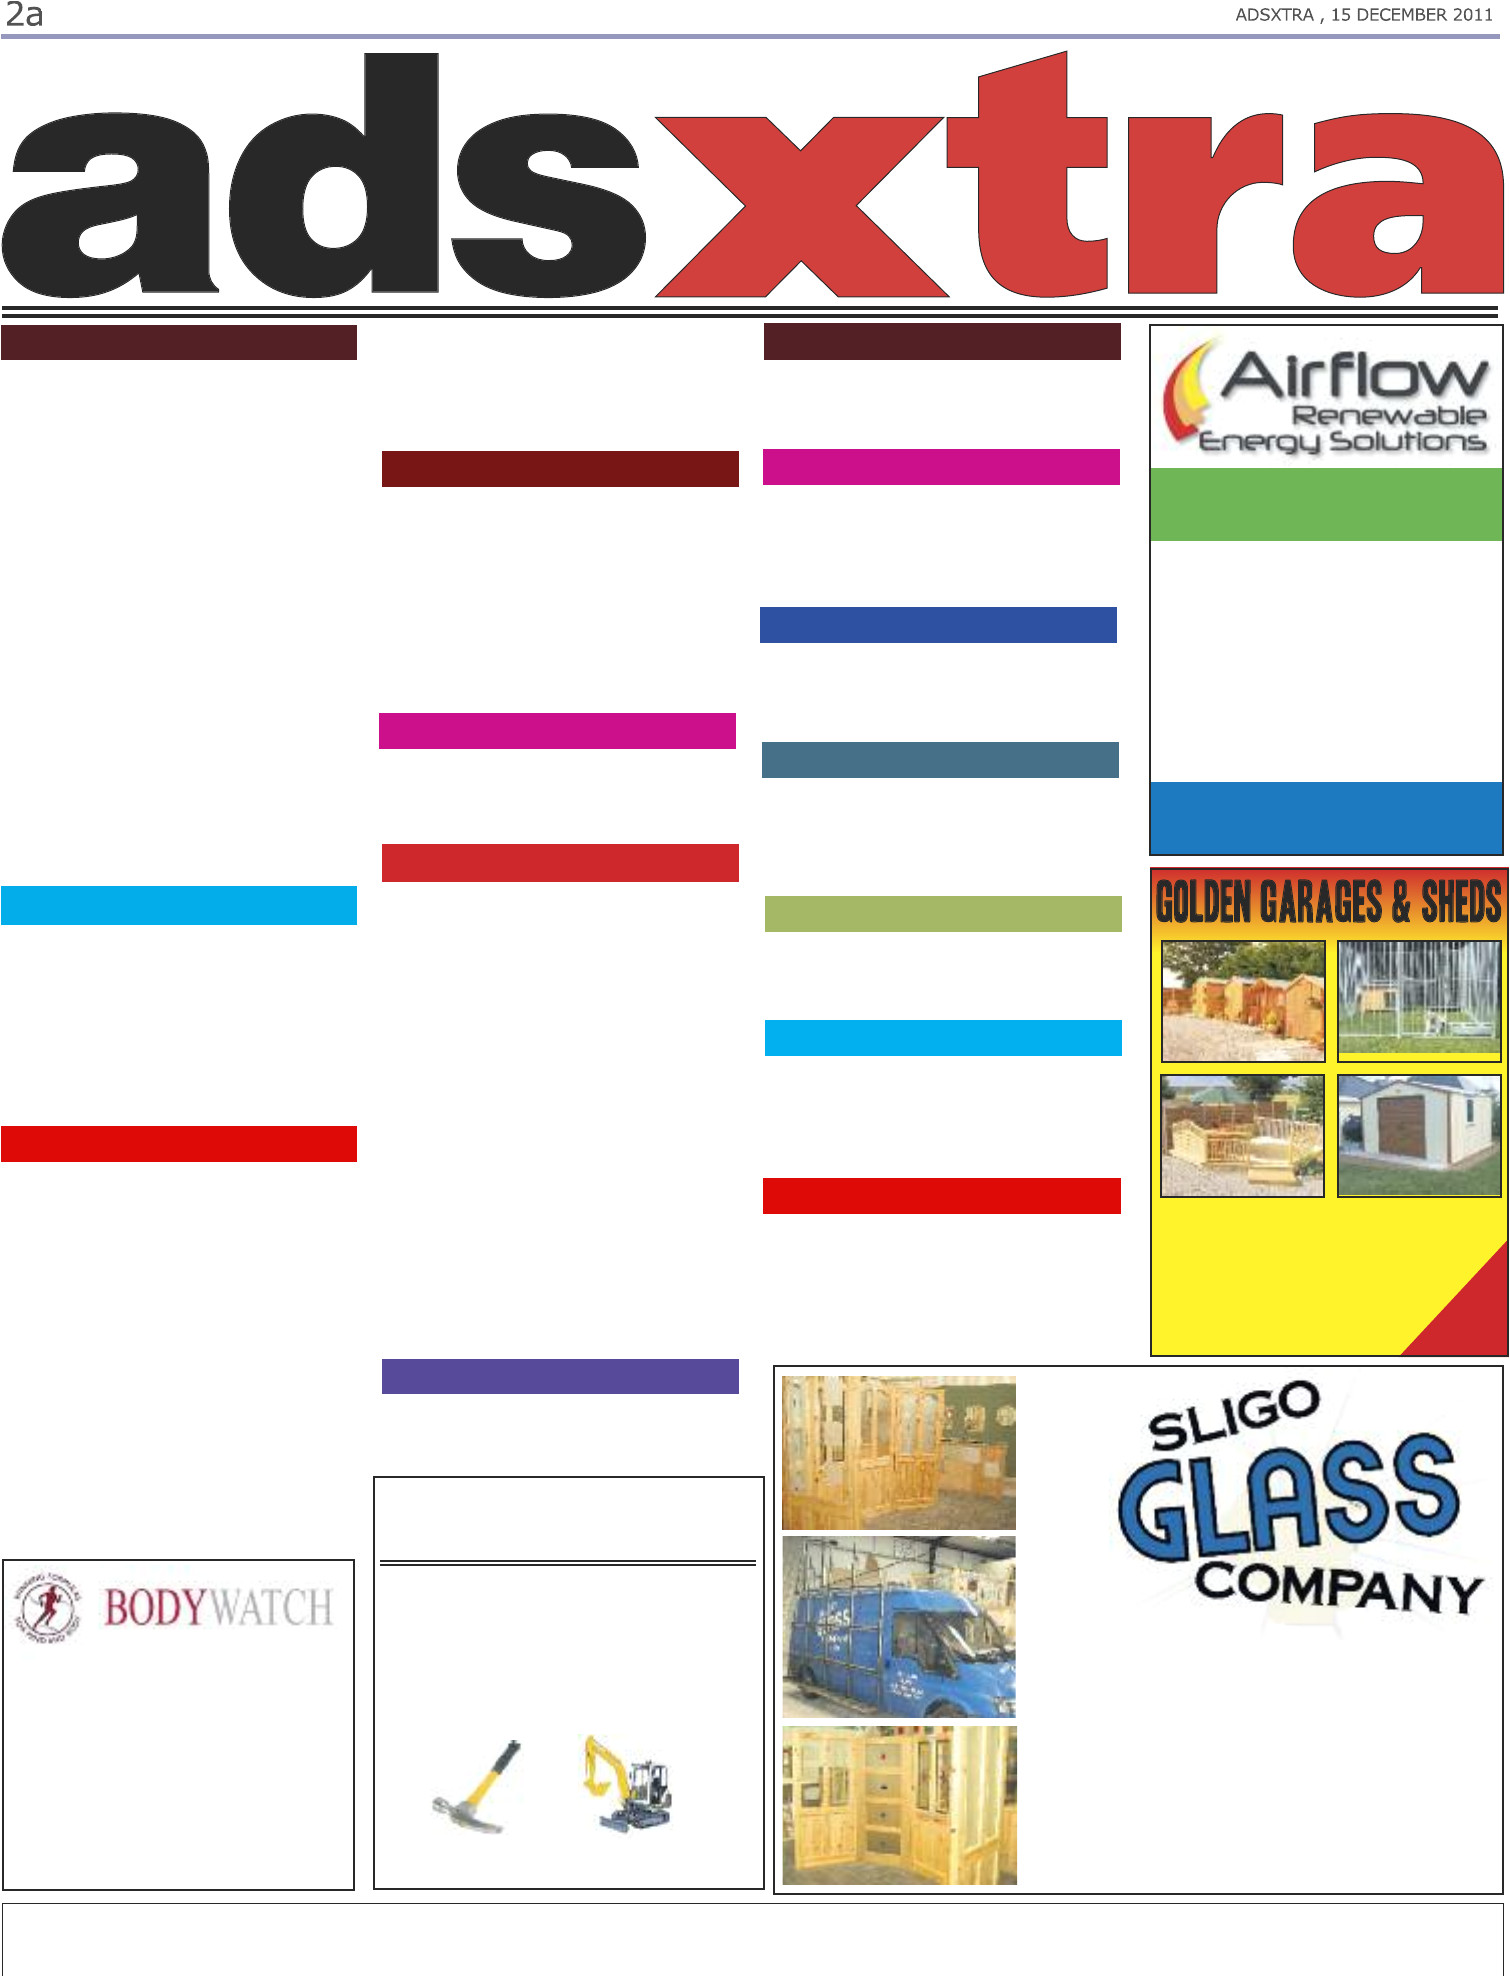 Xtrapower Easy Fuel Card form Ads Xtra December 15th 2011